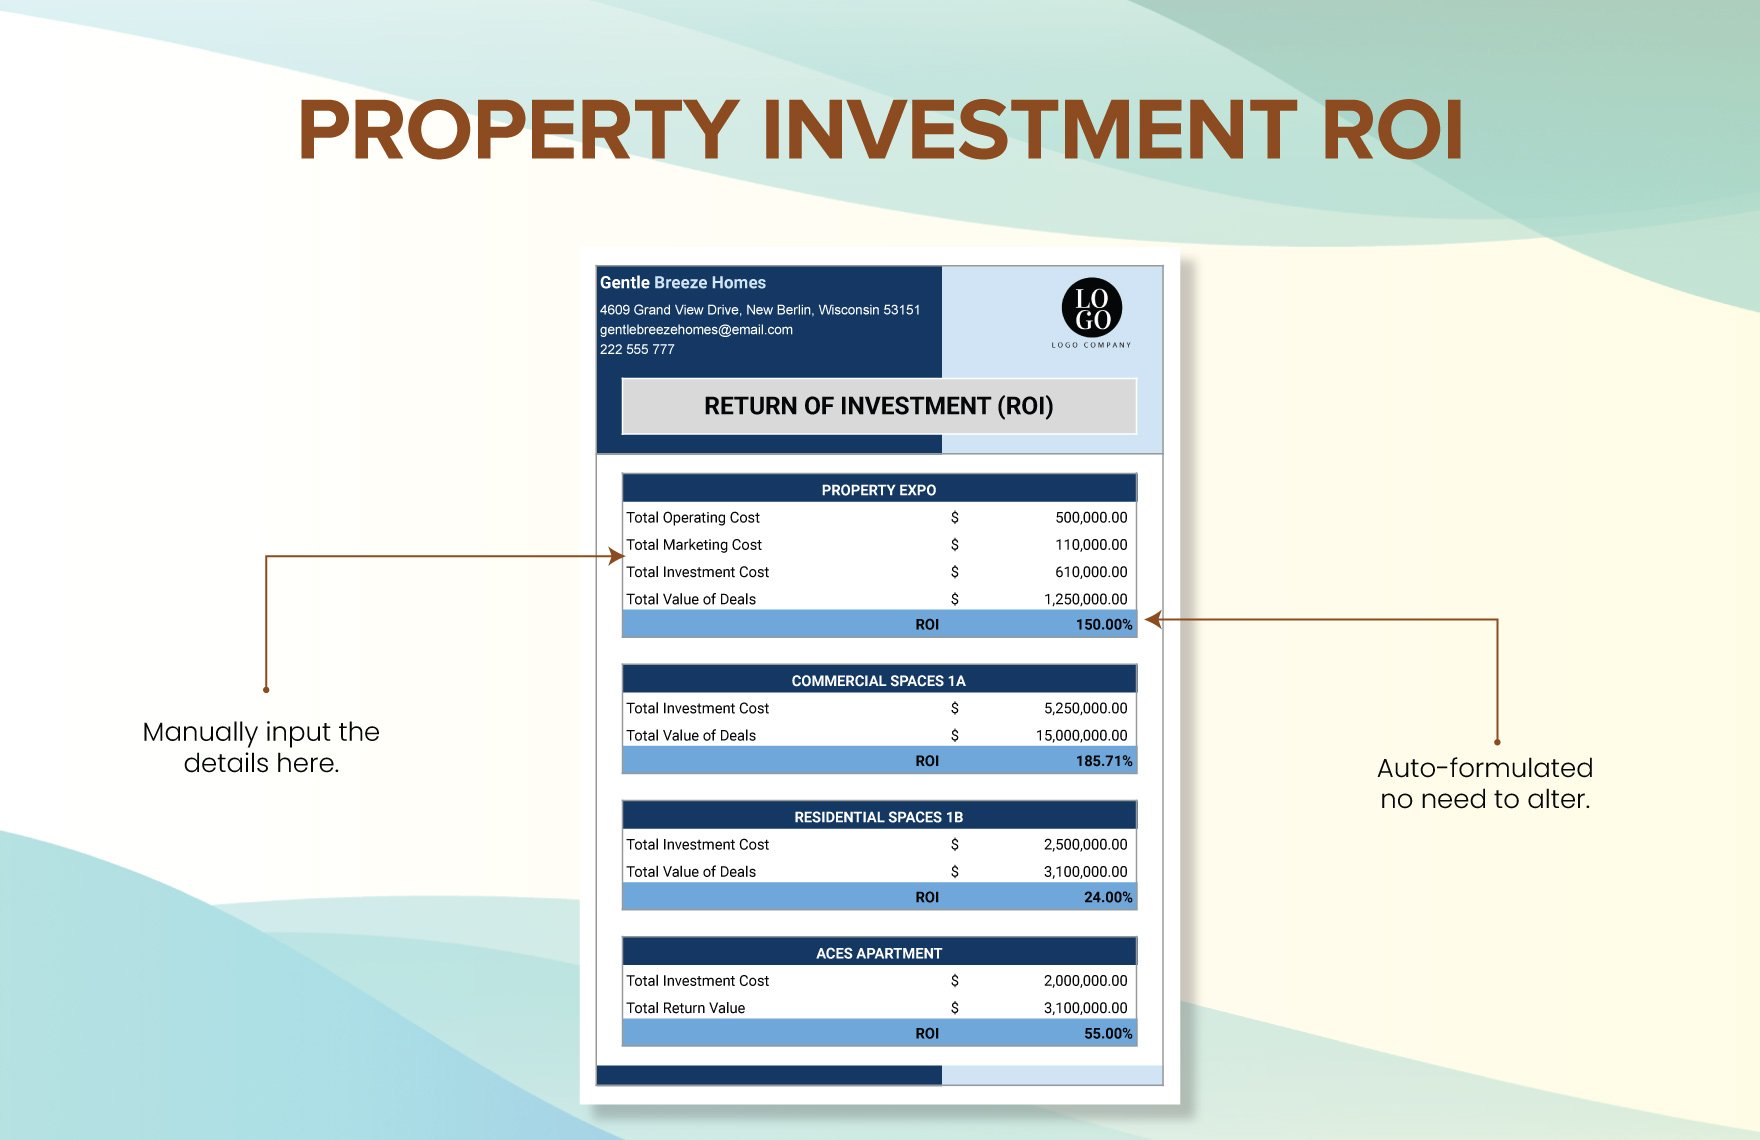 Property Investment ROI Template